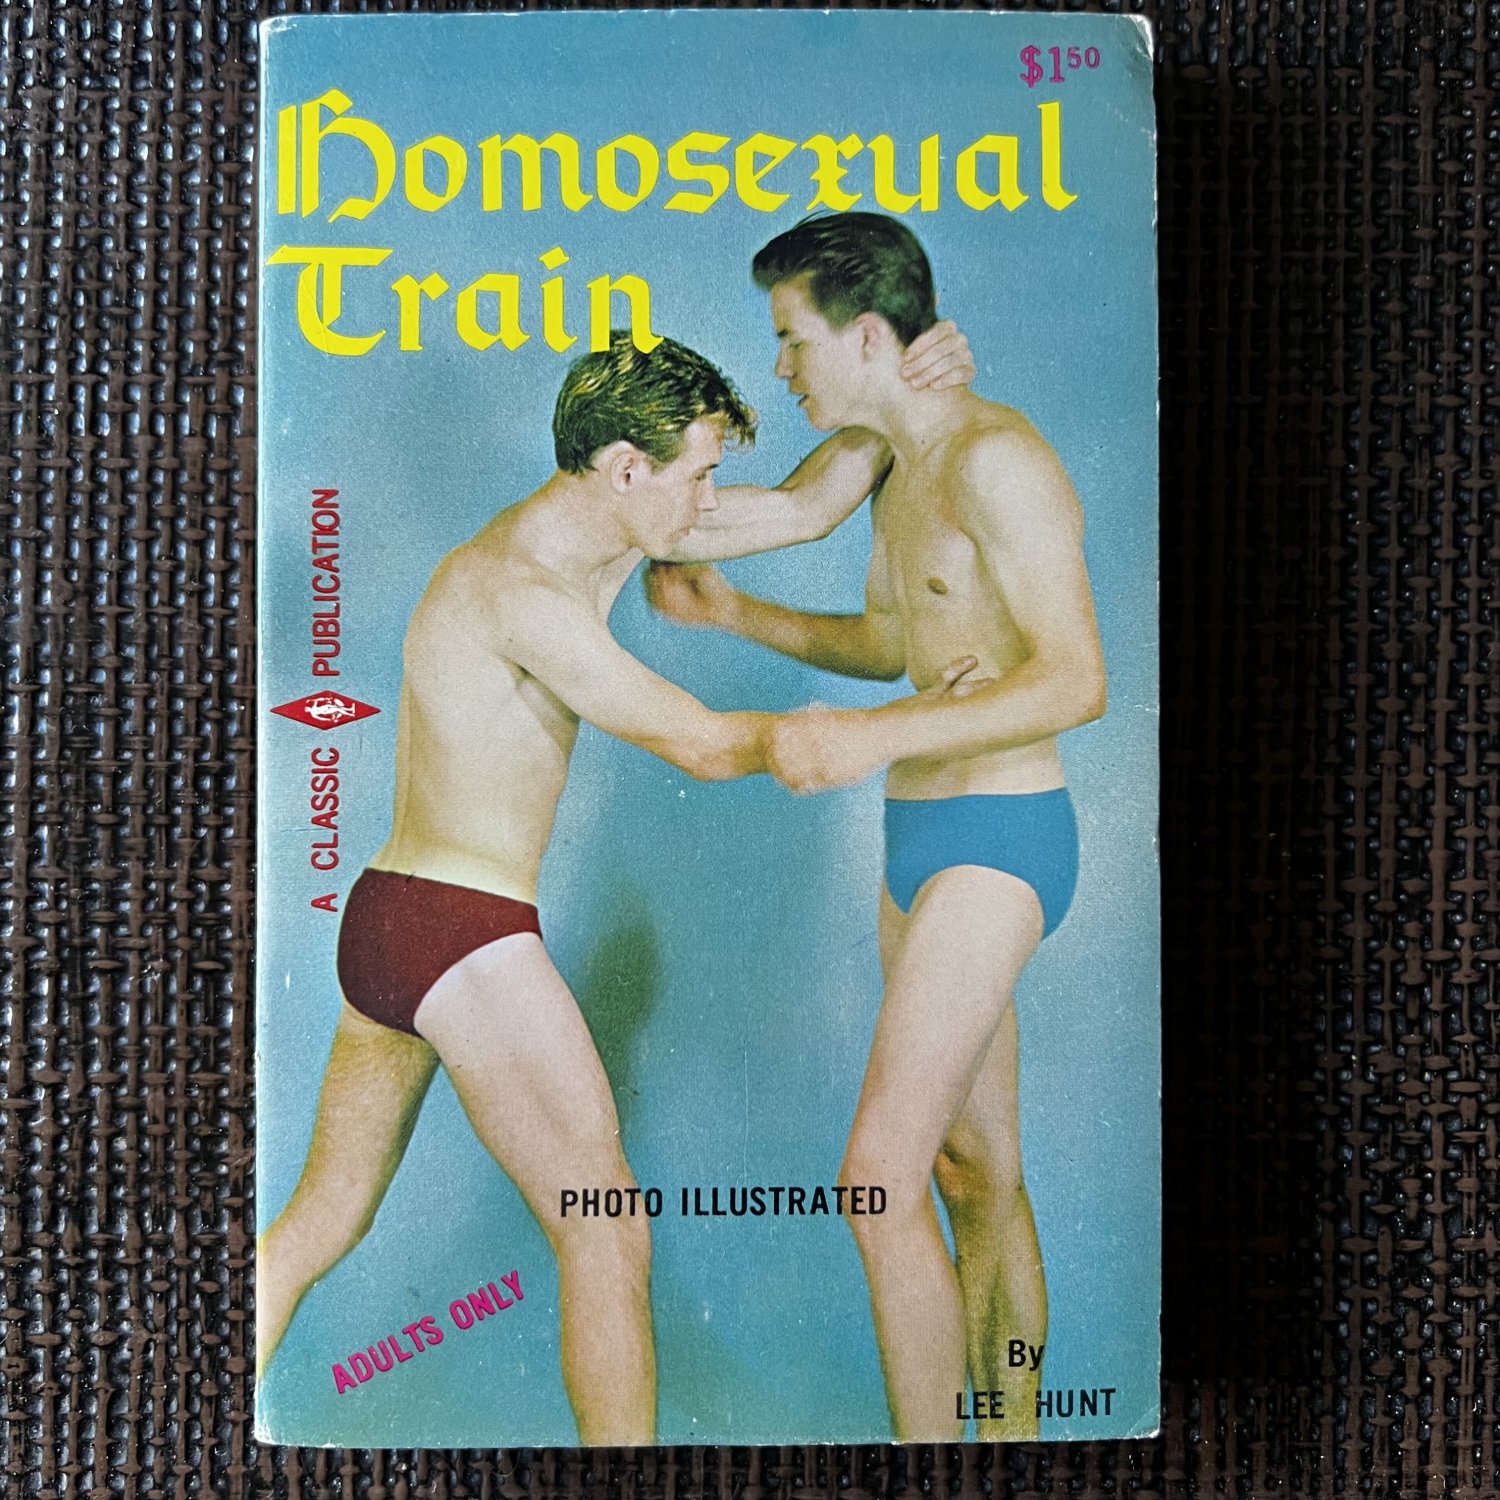 HOMOSEXUAL TRAIN (1968) CP 202 Male Nudes FIGURE FULLY ILLUSTRATED Gay Pulp ART Drawings Teen